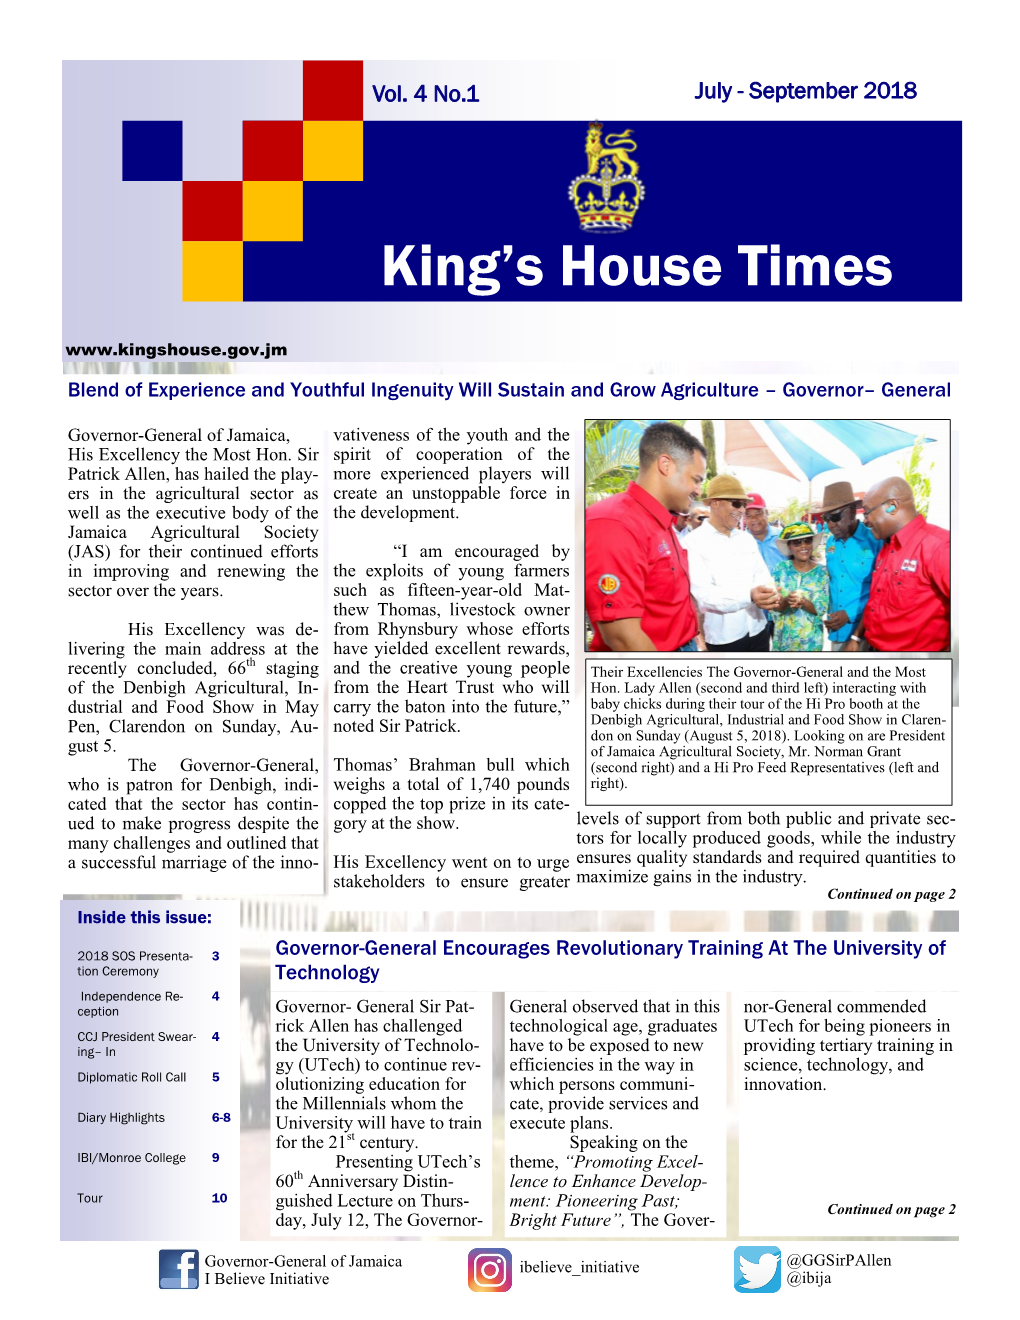 King's House Times